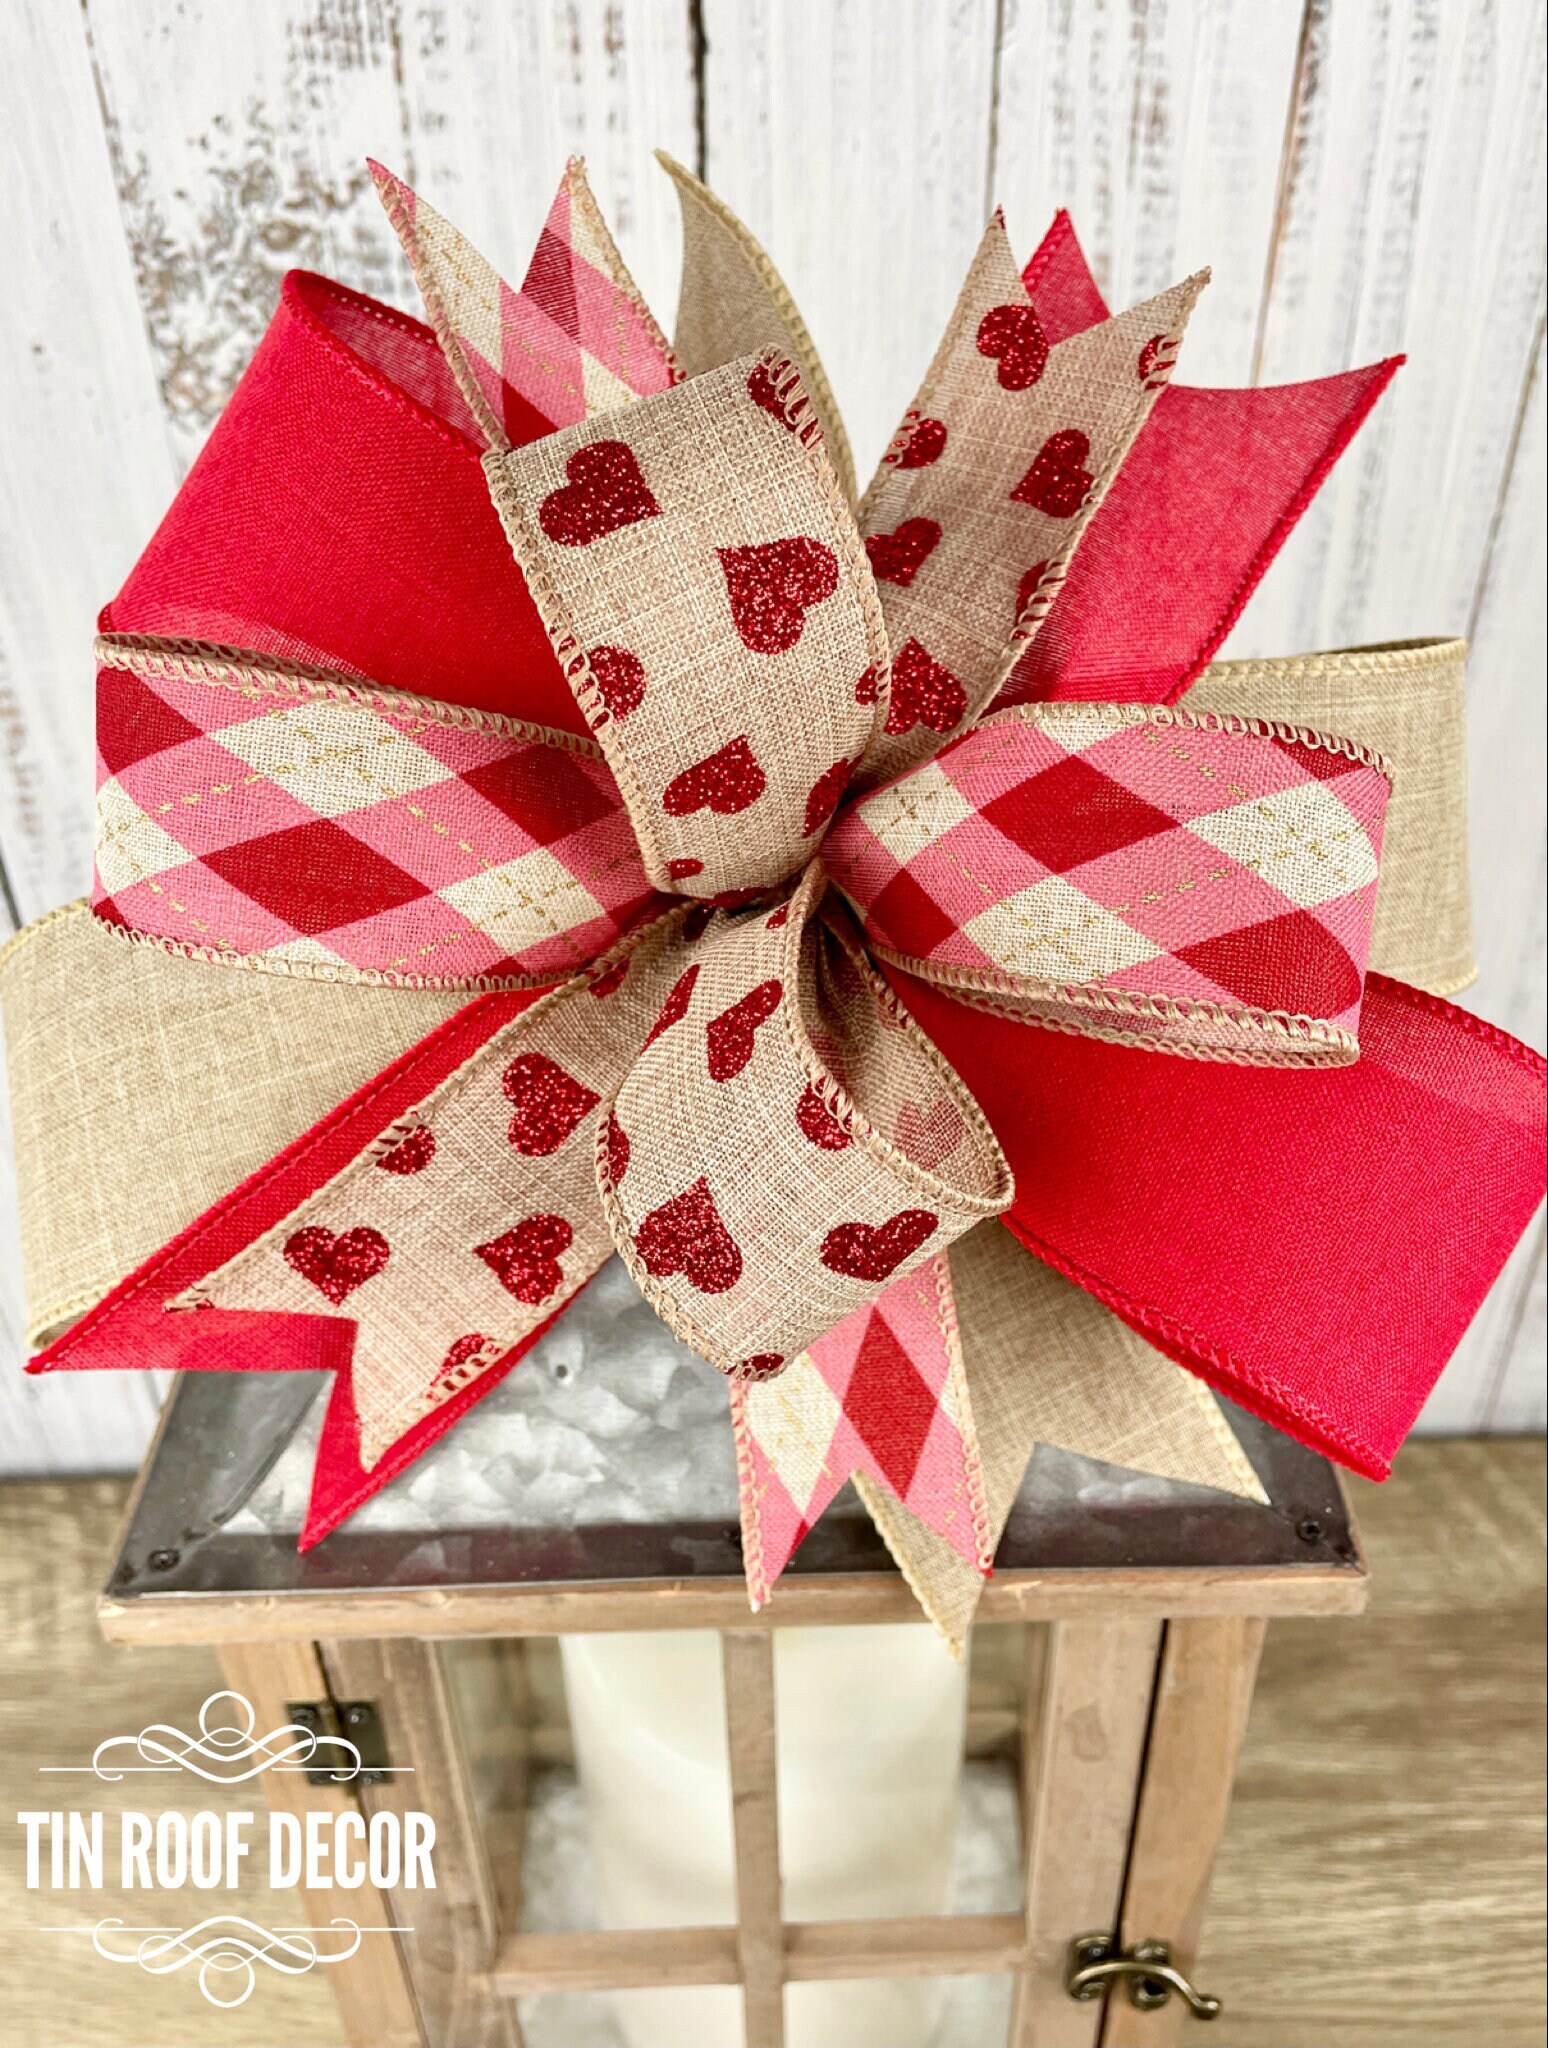  LANGFON Large Valentines Day Wreath Bows, Valentine Red Heart  Spots Truck Bows for Wreaths - White Burlap Valentine's Gift Wedding Party  Holiday Indoor Outdoor Decoration Supplies : Home & Kitchen